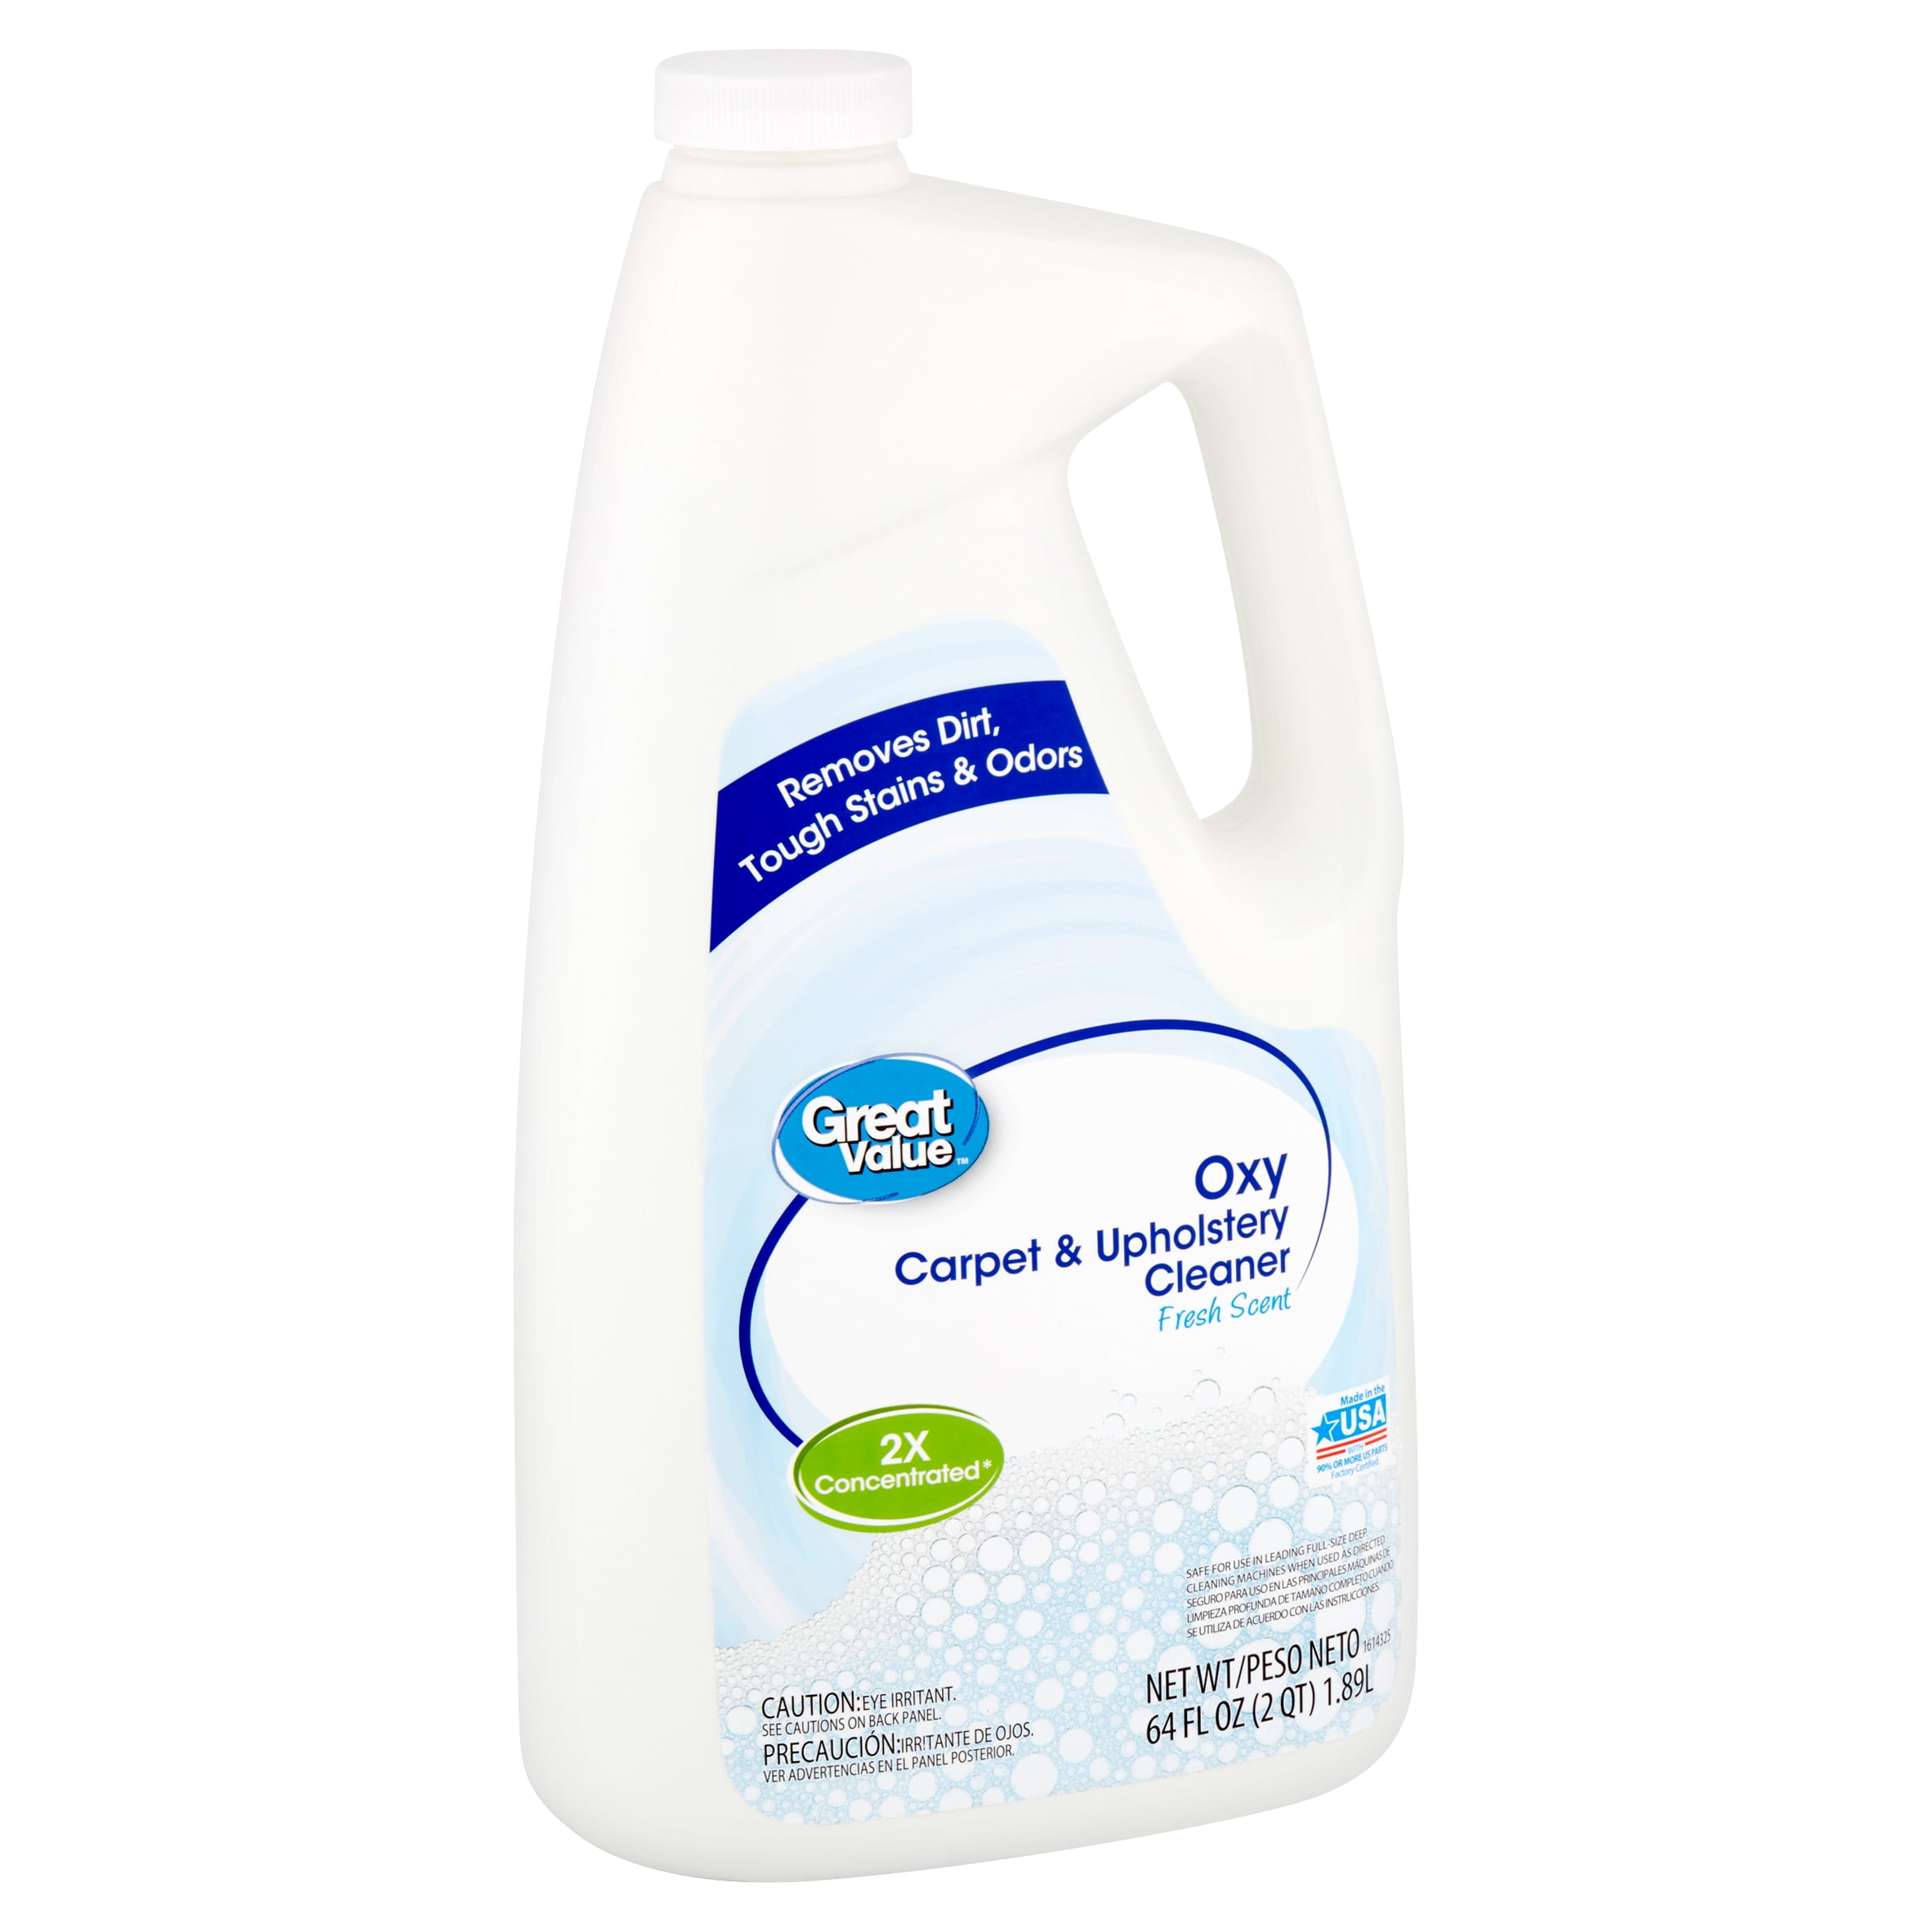 Value-priced cleaning products